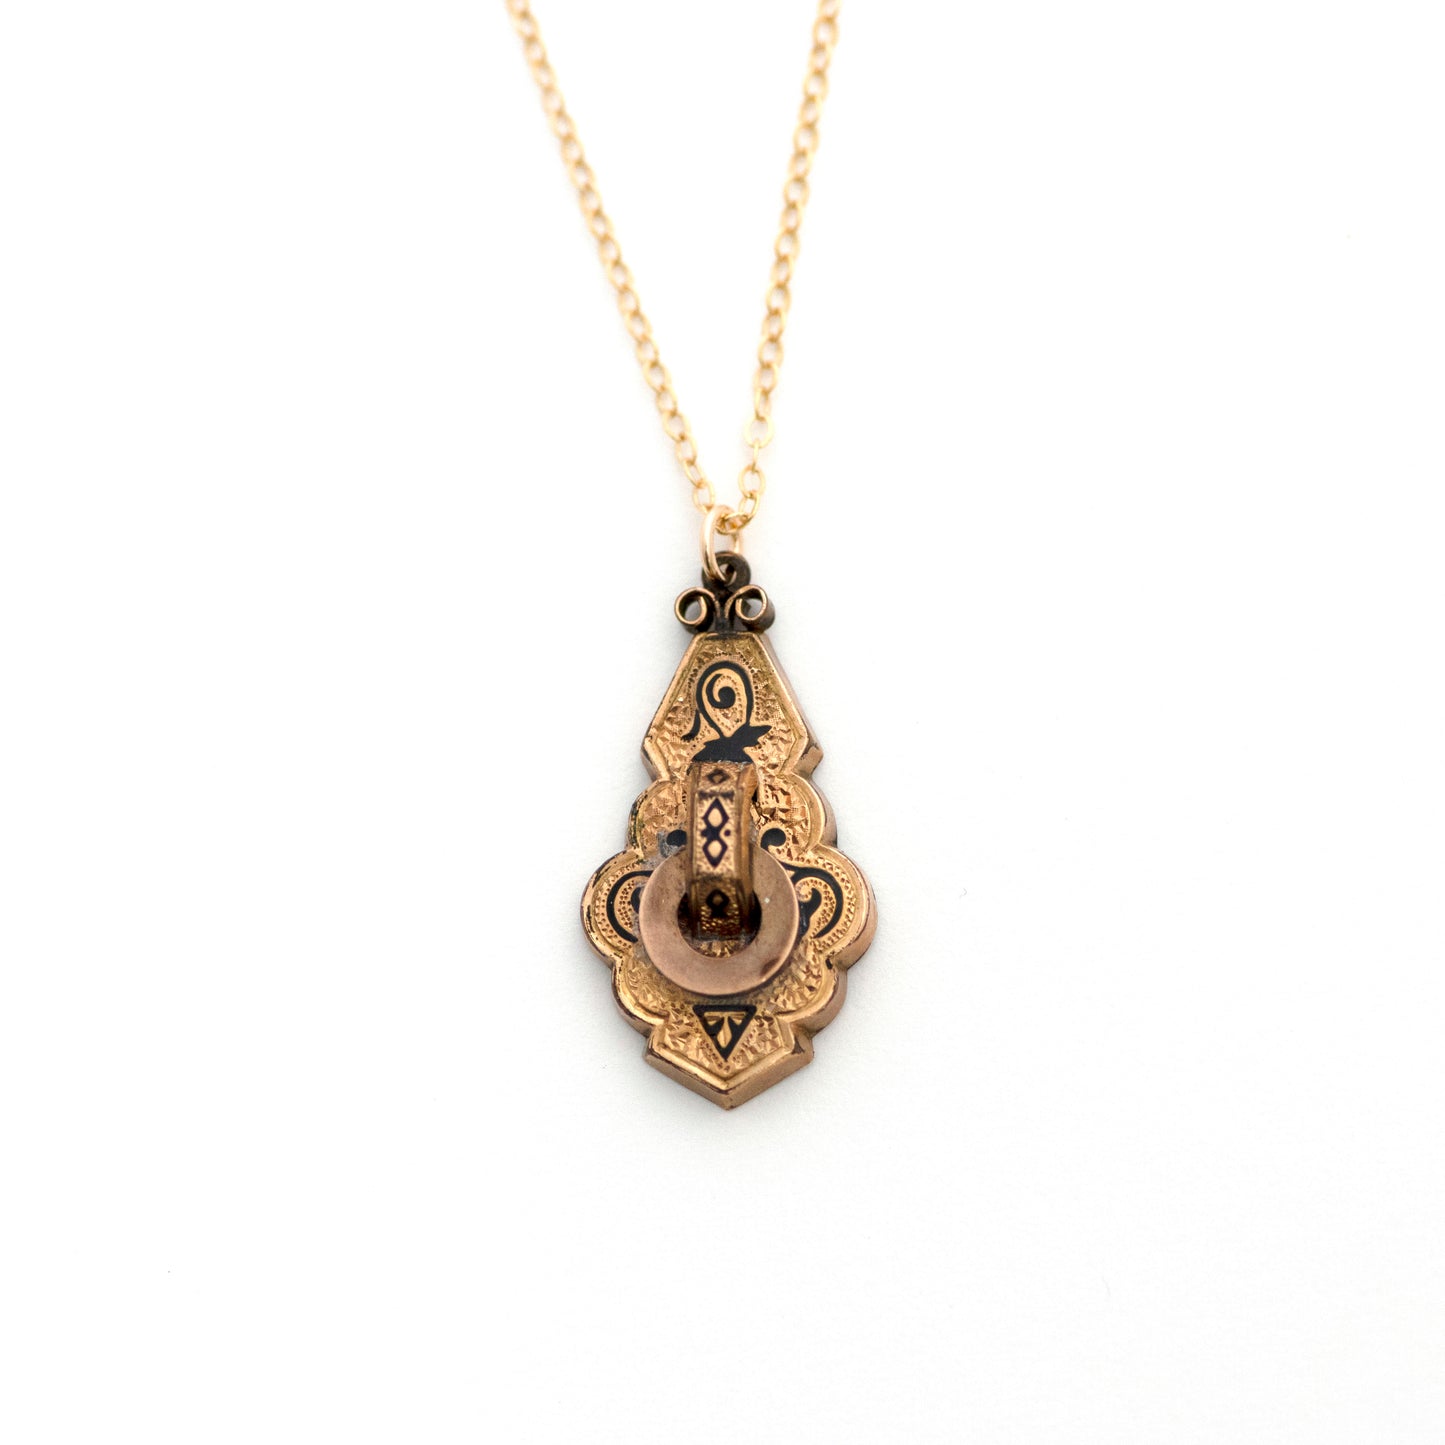 Victorian Taille d'Epargne Architectural Pendant with 14k yellow gold filled chain Necklace 